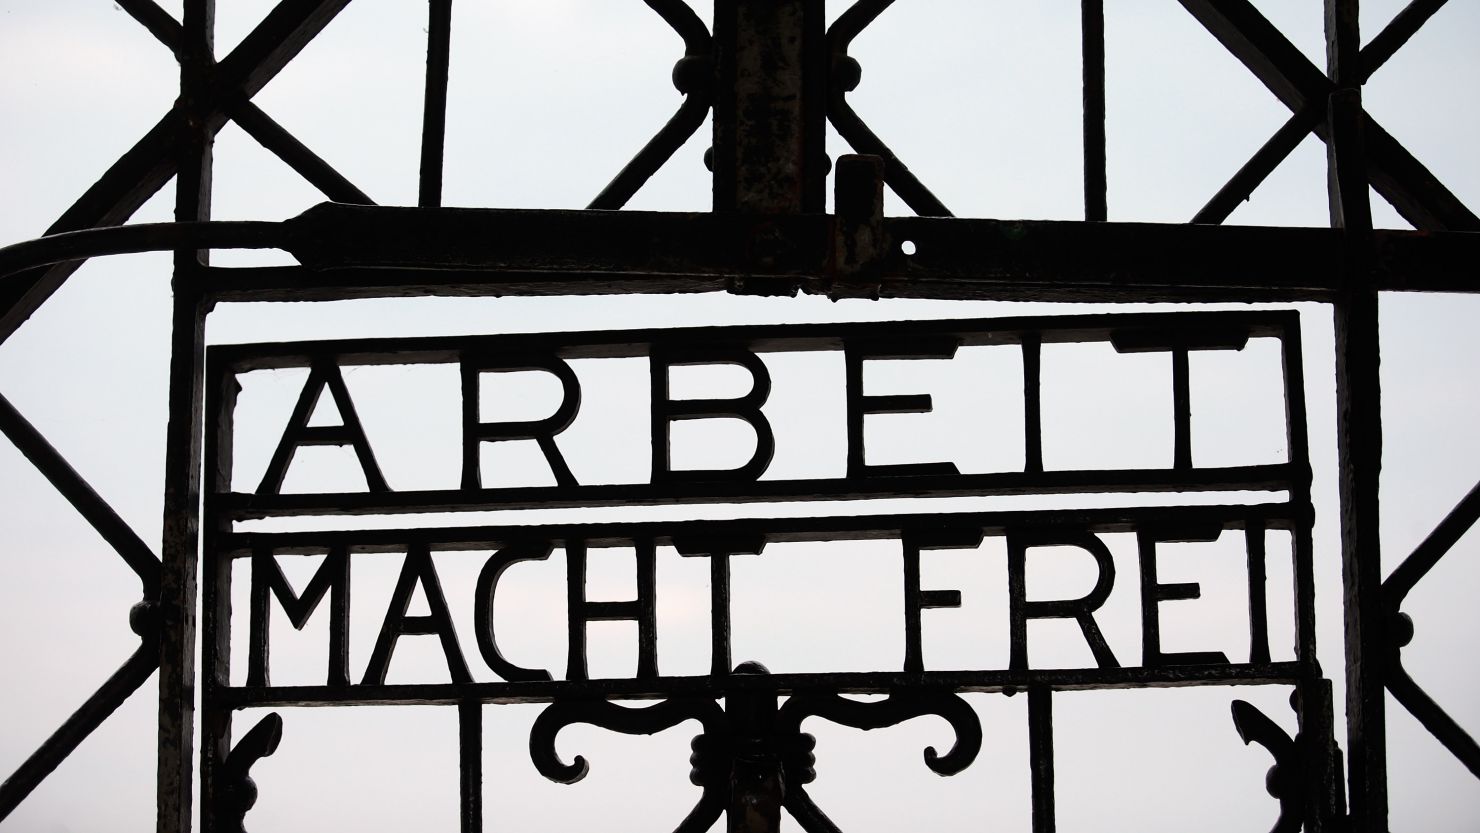 The entrance to the former concentration camp Dachau (reading 'Arbeit macht frei' / 'Work Liberates')  pictured on September 11, 2014 in Dachau, Germany.